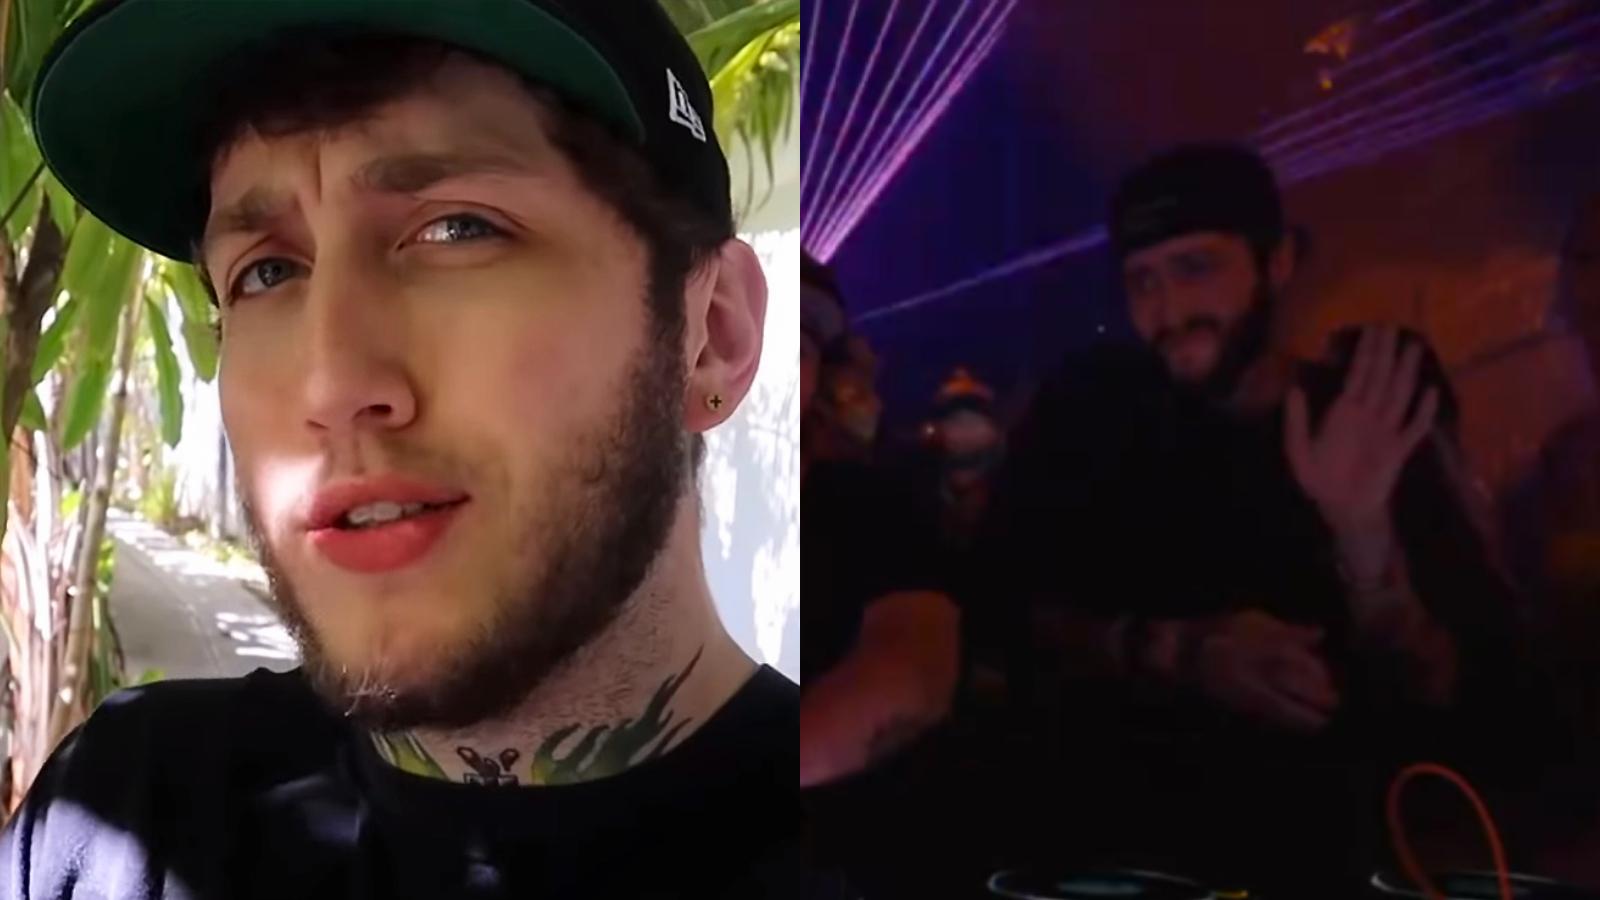 FaZe Banks partying in a club.